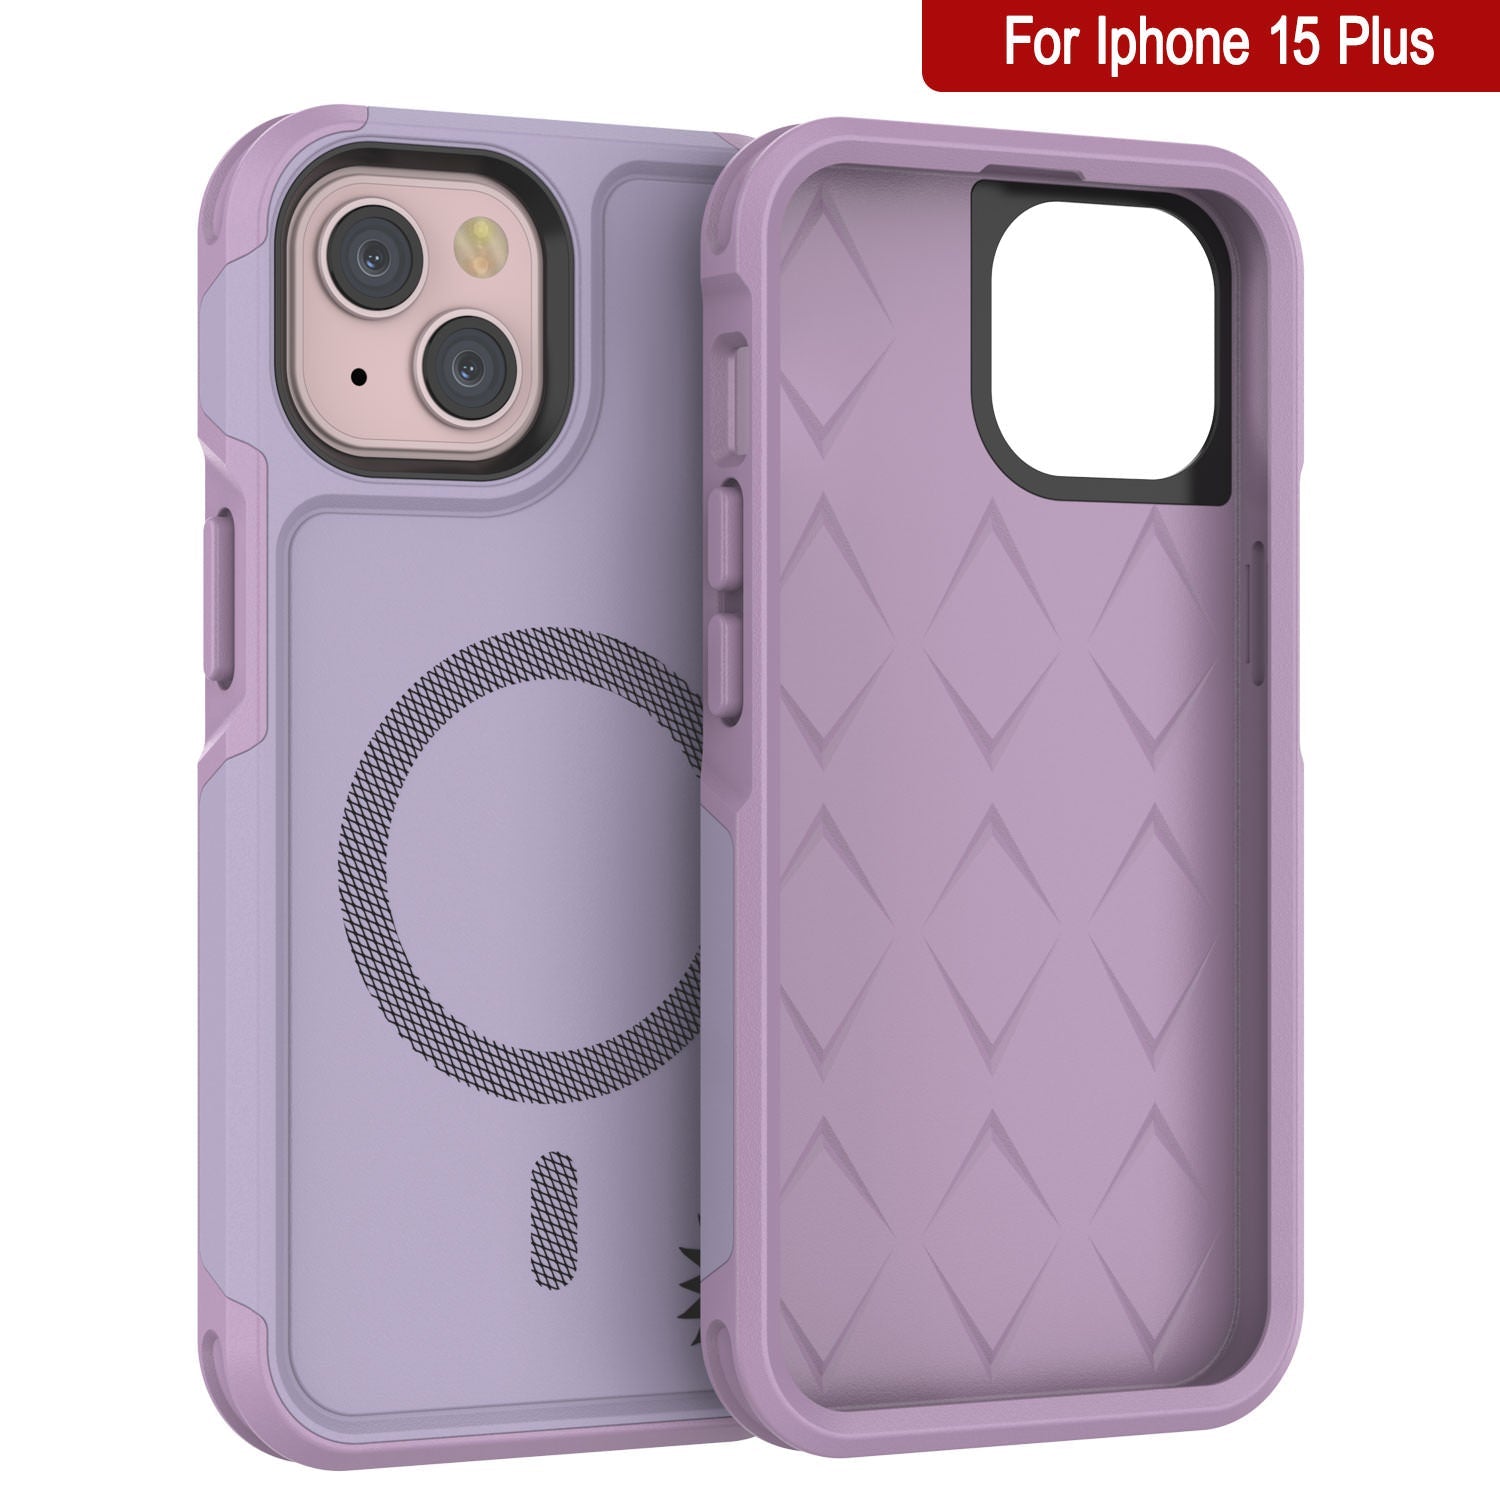 PunkCase iPhone 15 Plus Case, [Spartan 2.0 Series] Clear Rugged Heavy Duty Cover W/Built in Screen Protector [lilac]